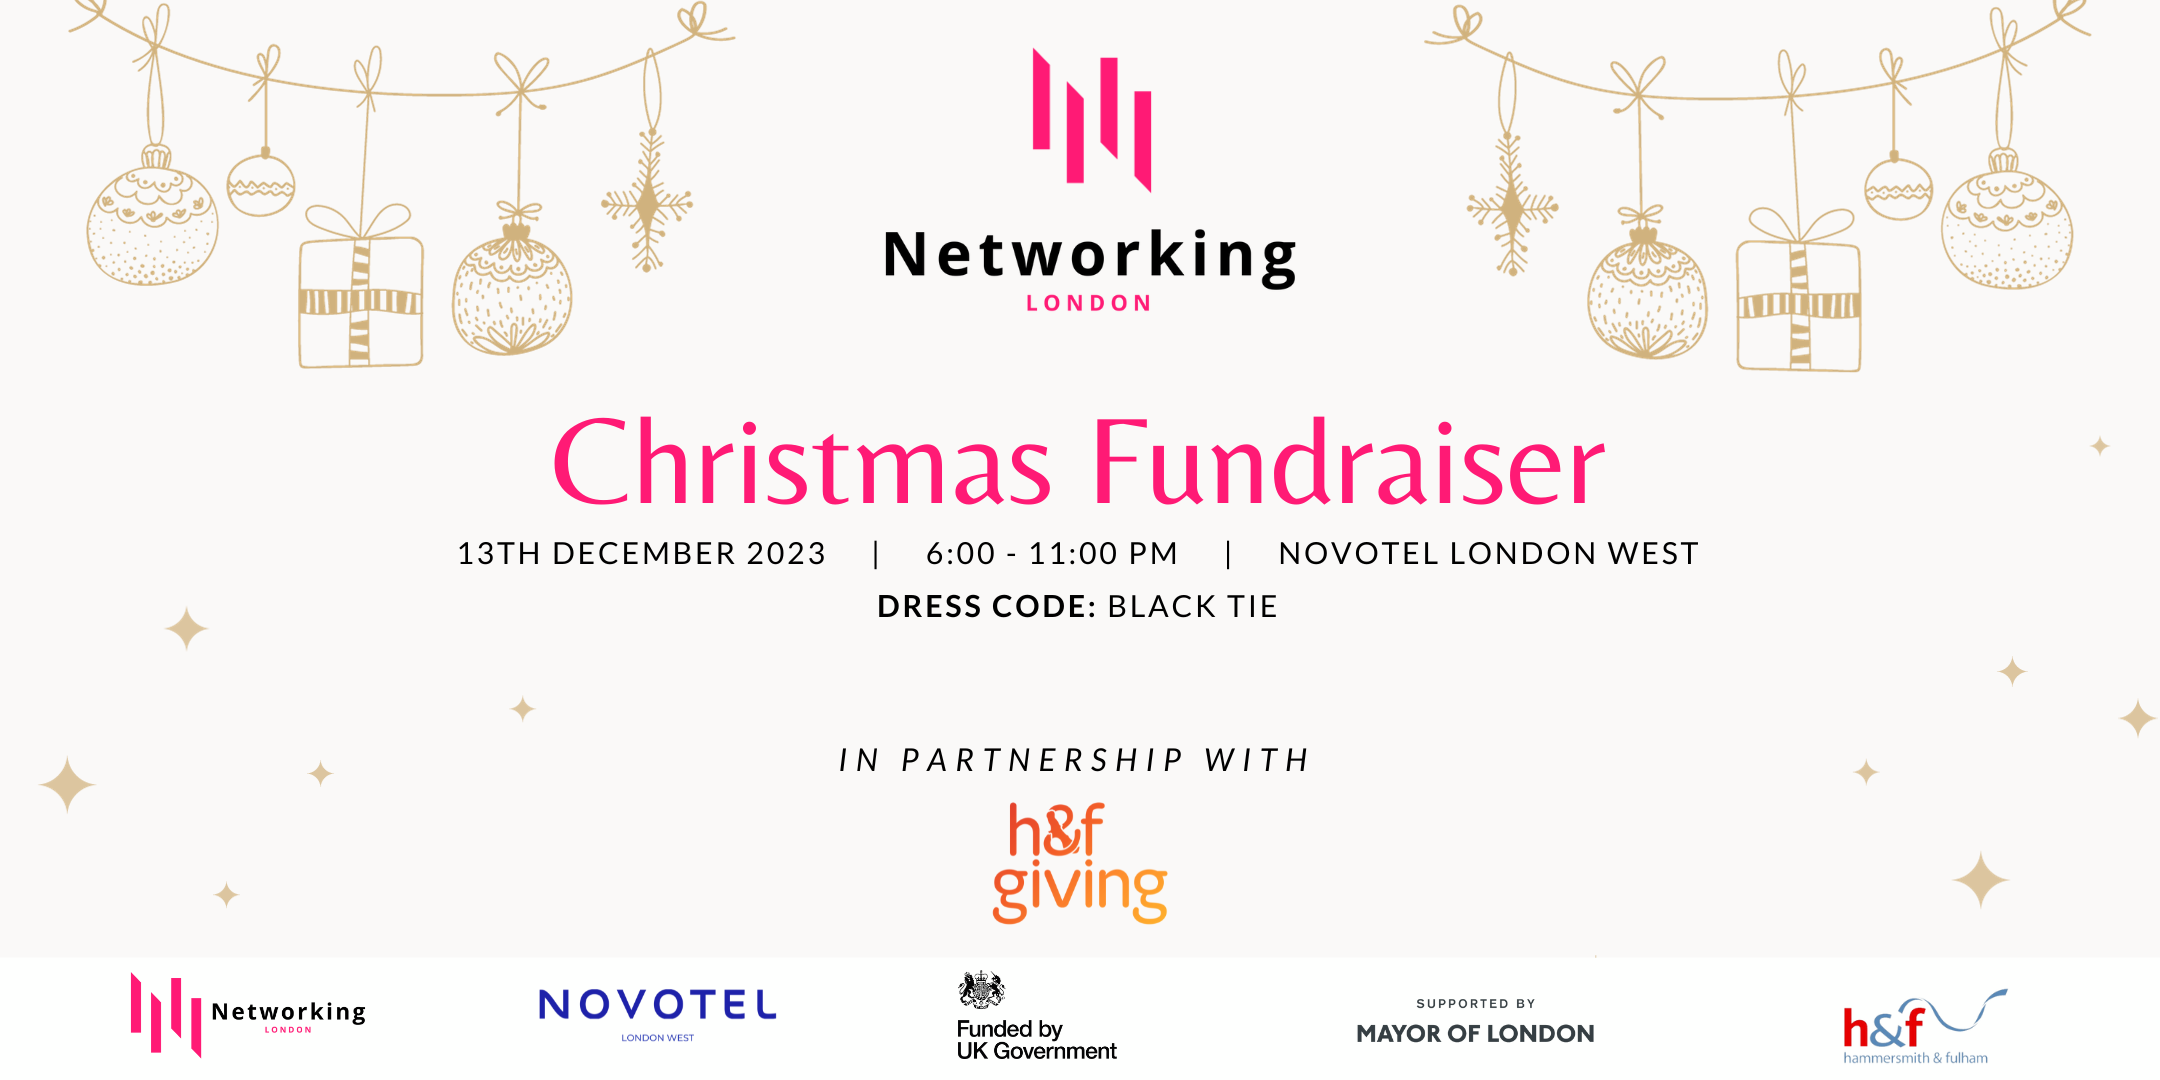 Join us at our Christmas Fundraiser!